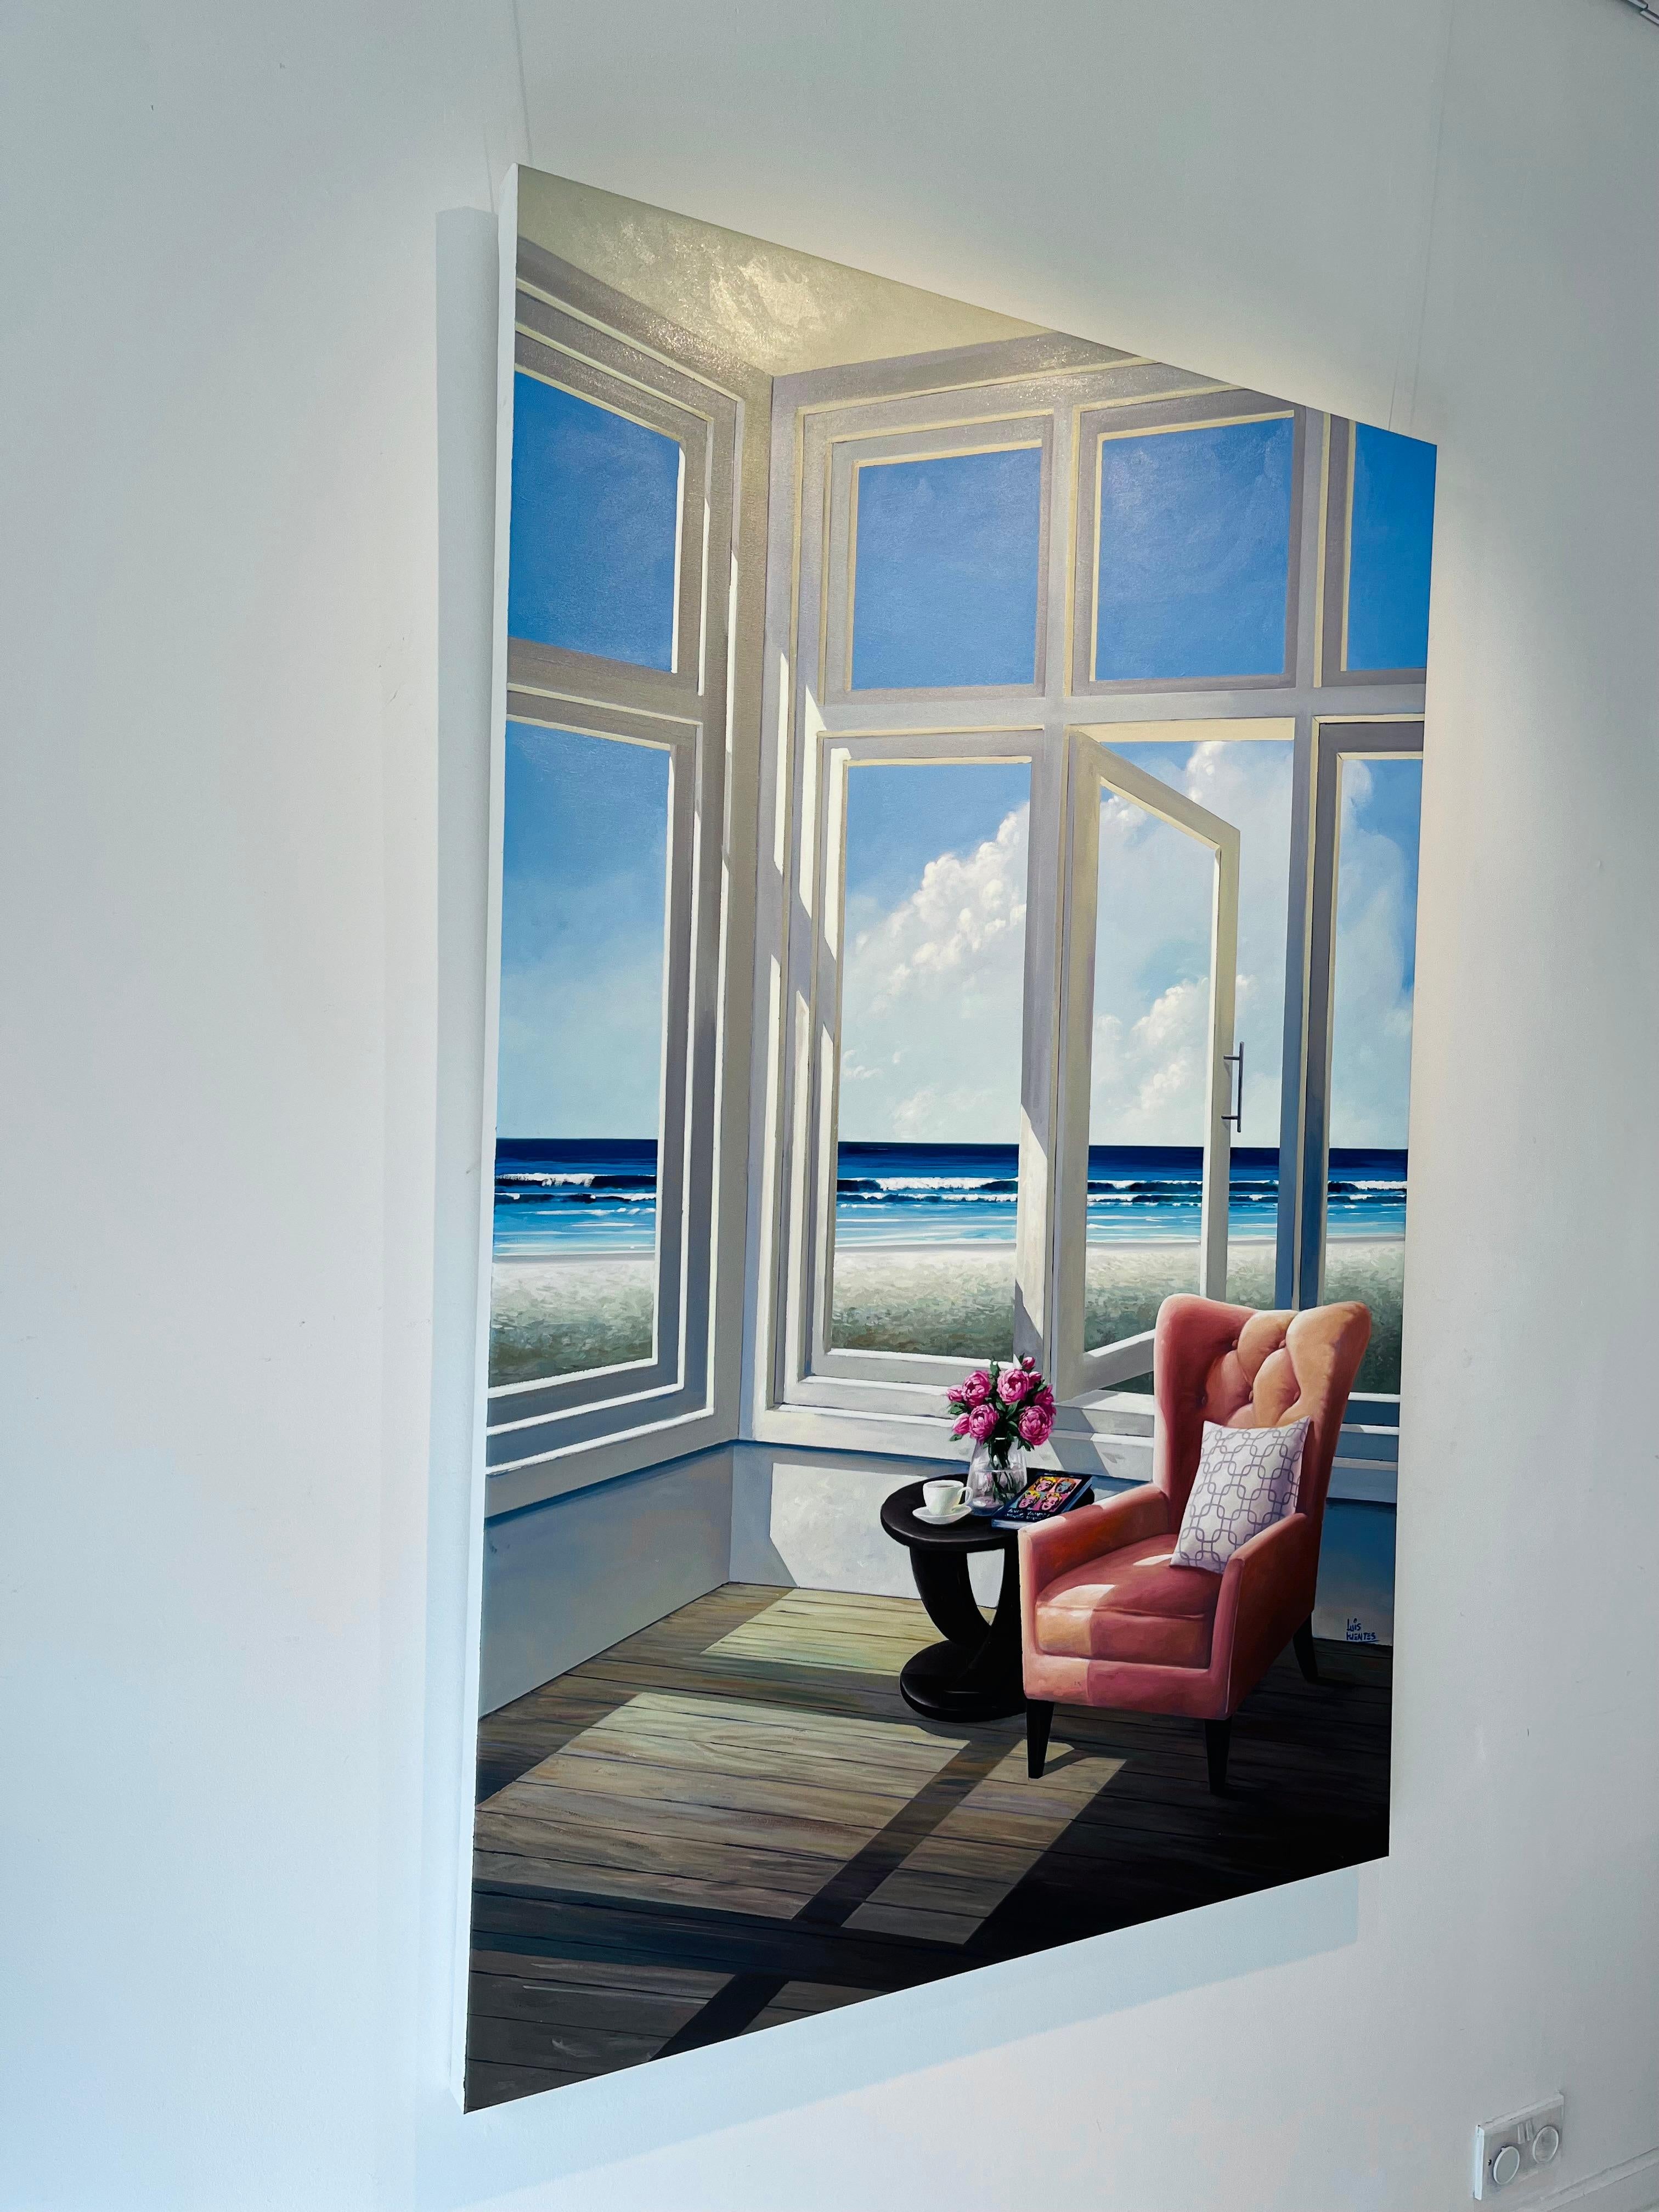 Beyond Tranquility-original still life-seascape oil painting-contemporary Art - Gray Interior Painting by Luis Fuentes